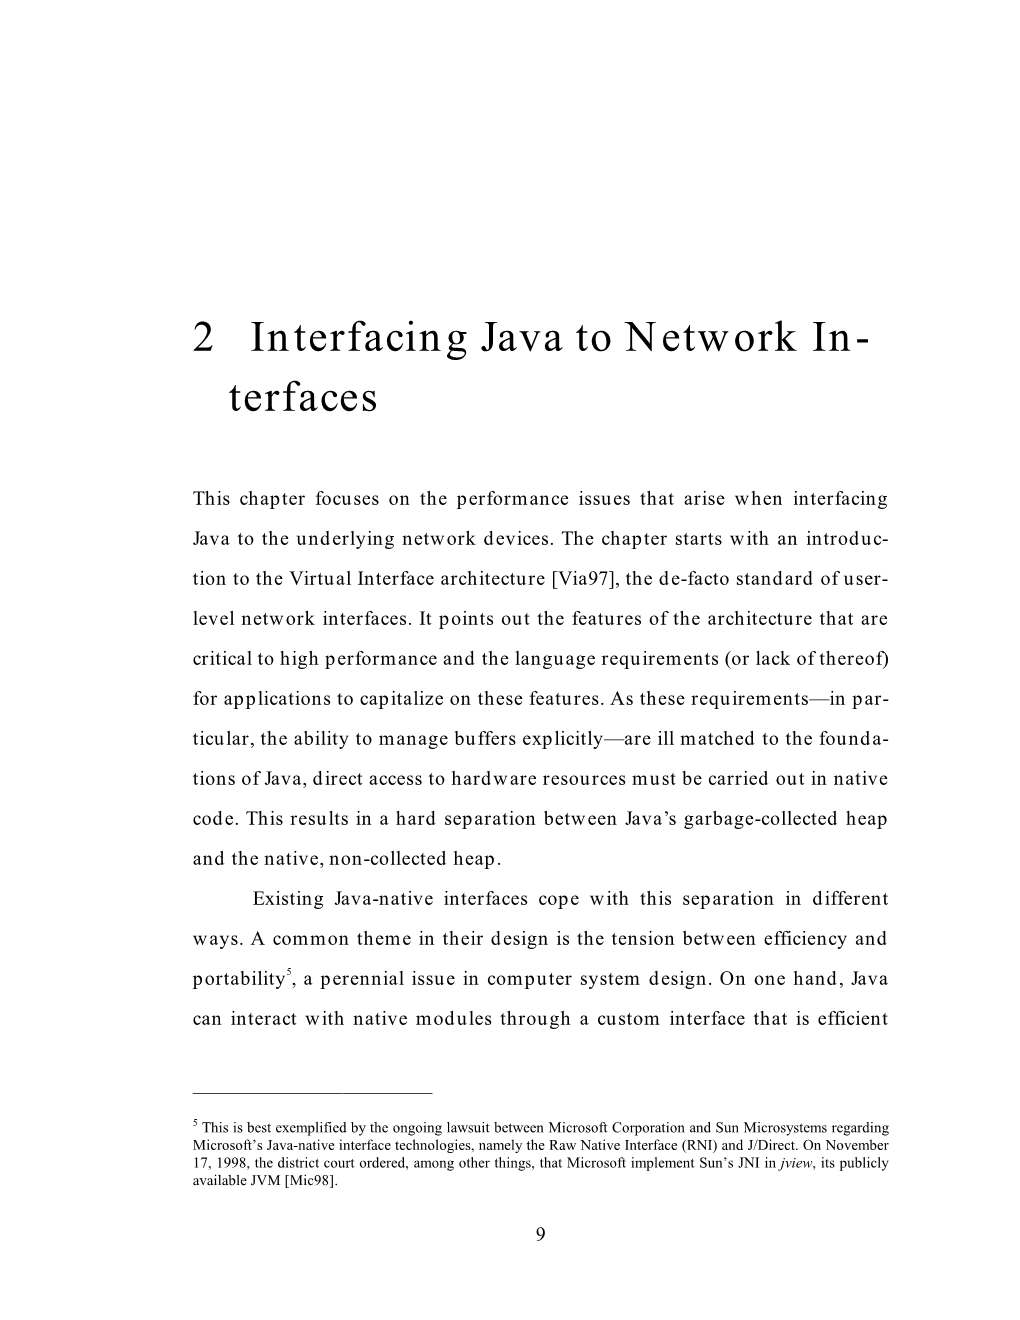 2 Interfacing Java to Network In- Terfaces